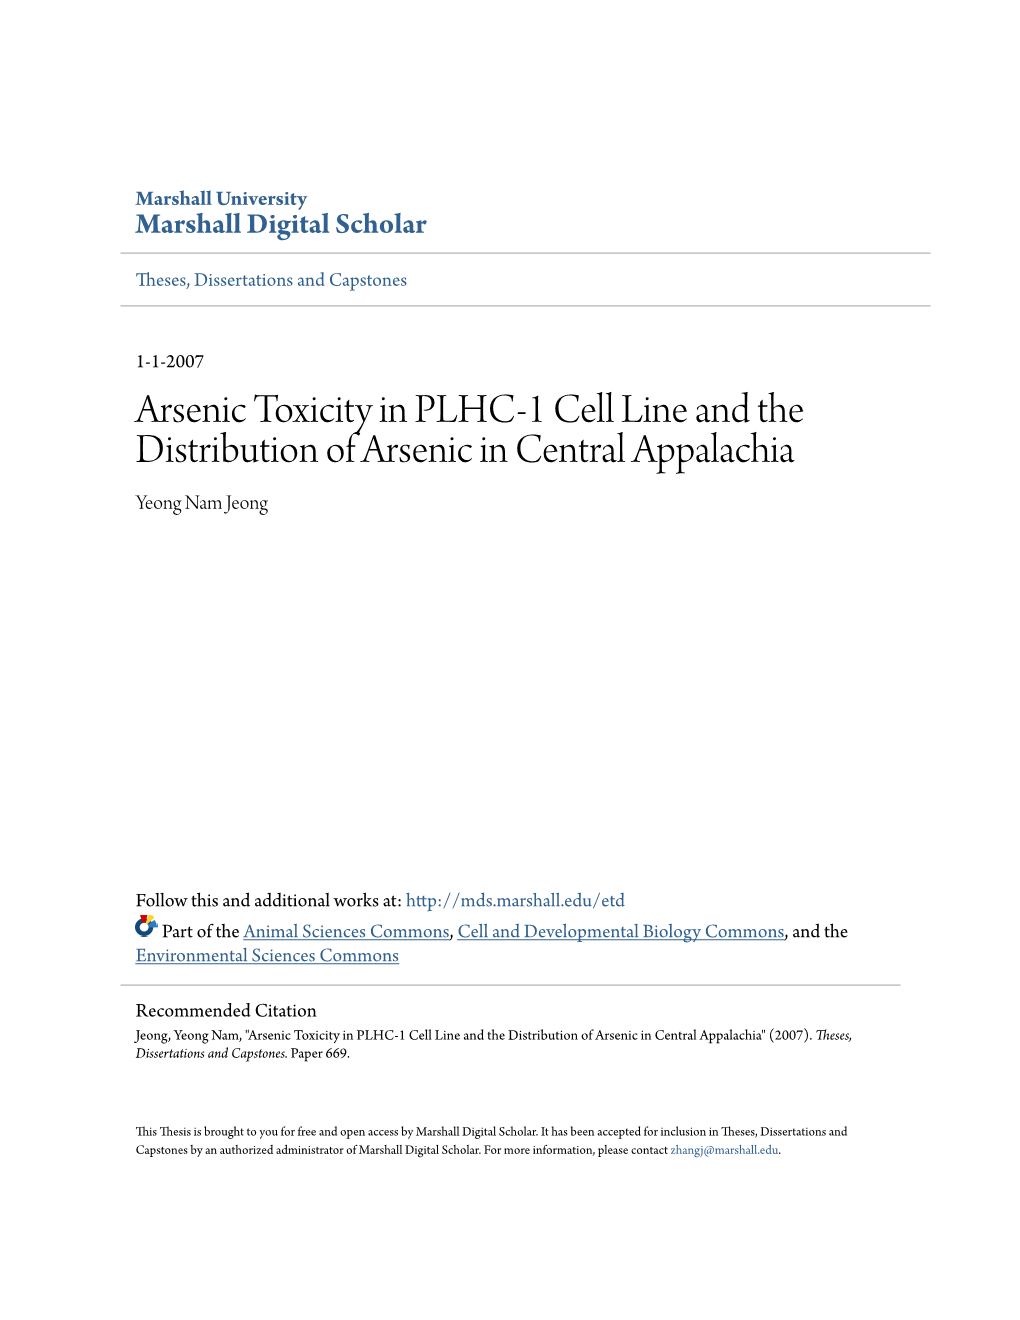 Arsenic Toxicity in PLHC-1 Cell Line and the Distribution of Arsenic in Central Appalachia Yeong Nam Jeong